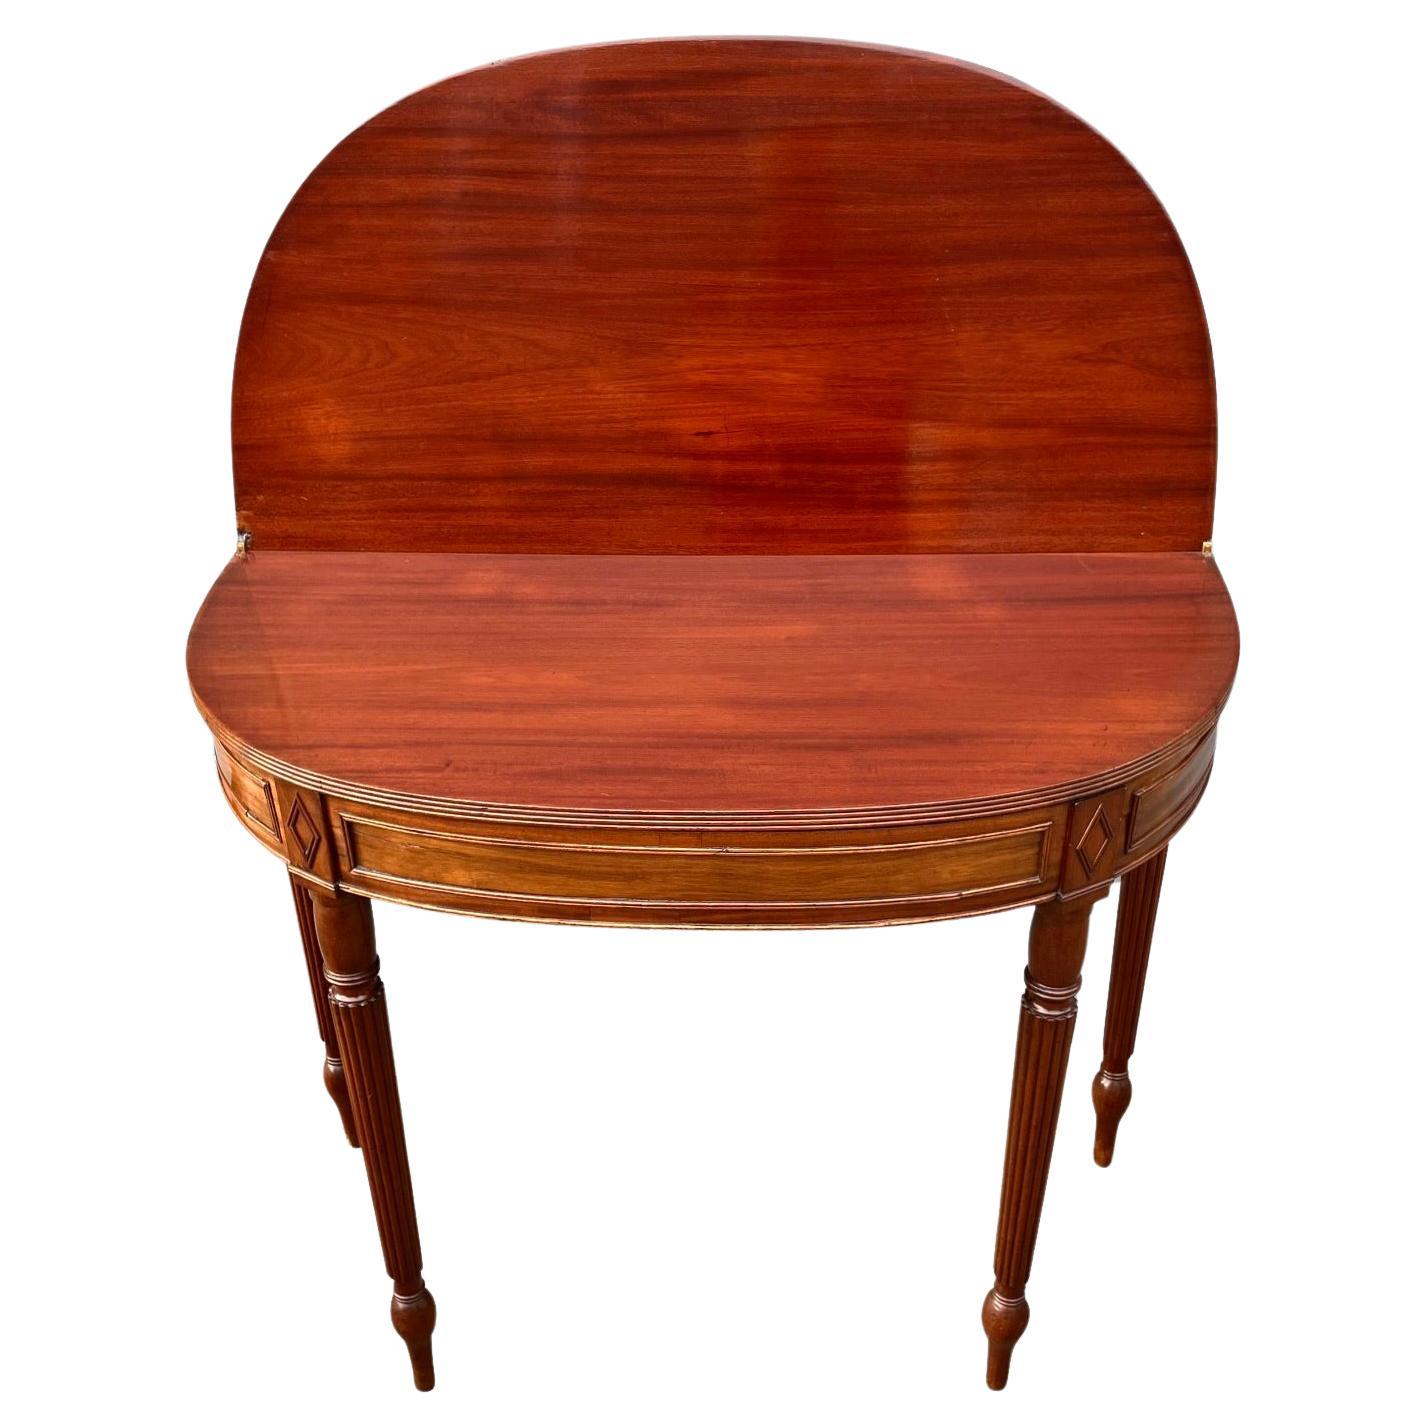 English Regency Period Mahogany Flip Top Game or Tea Table with Reeded Legs For Sale